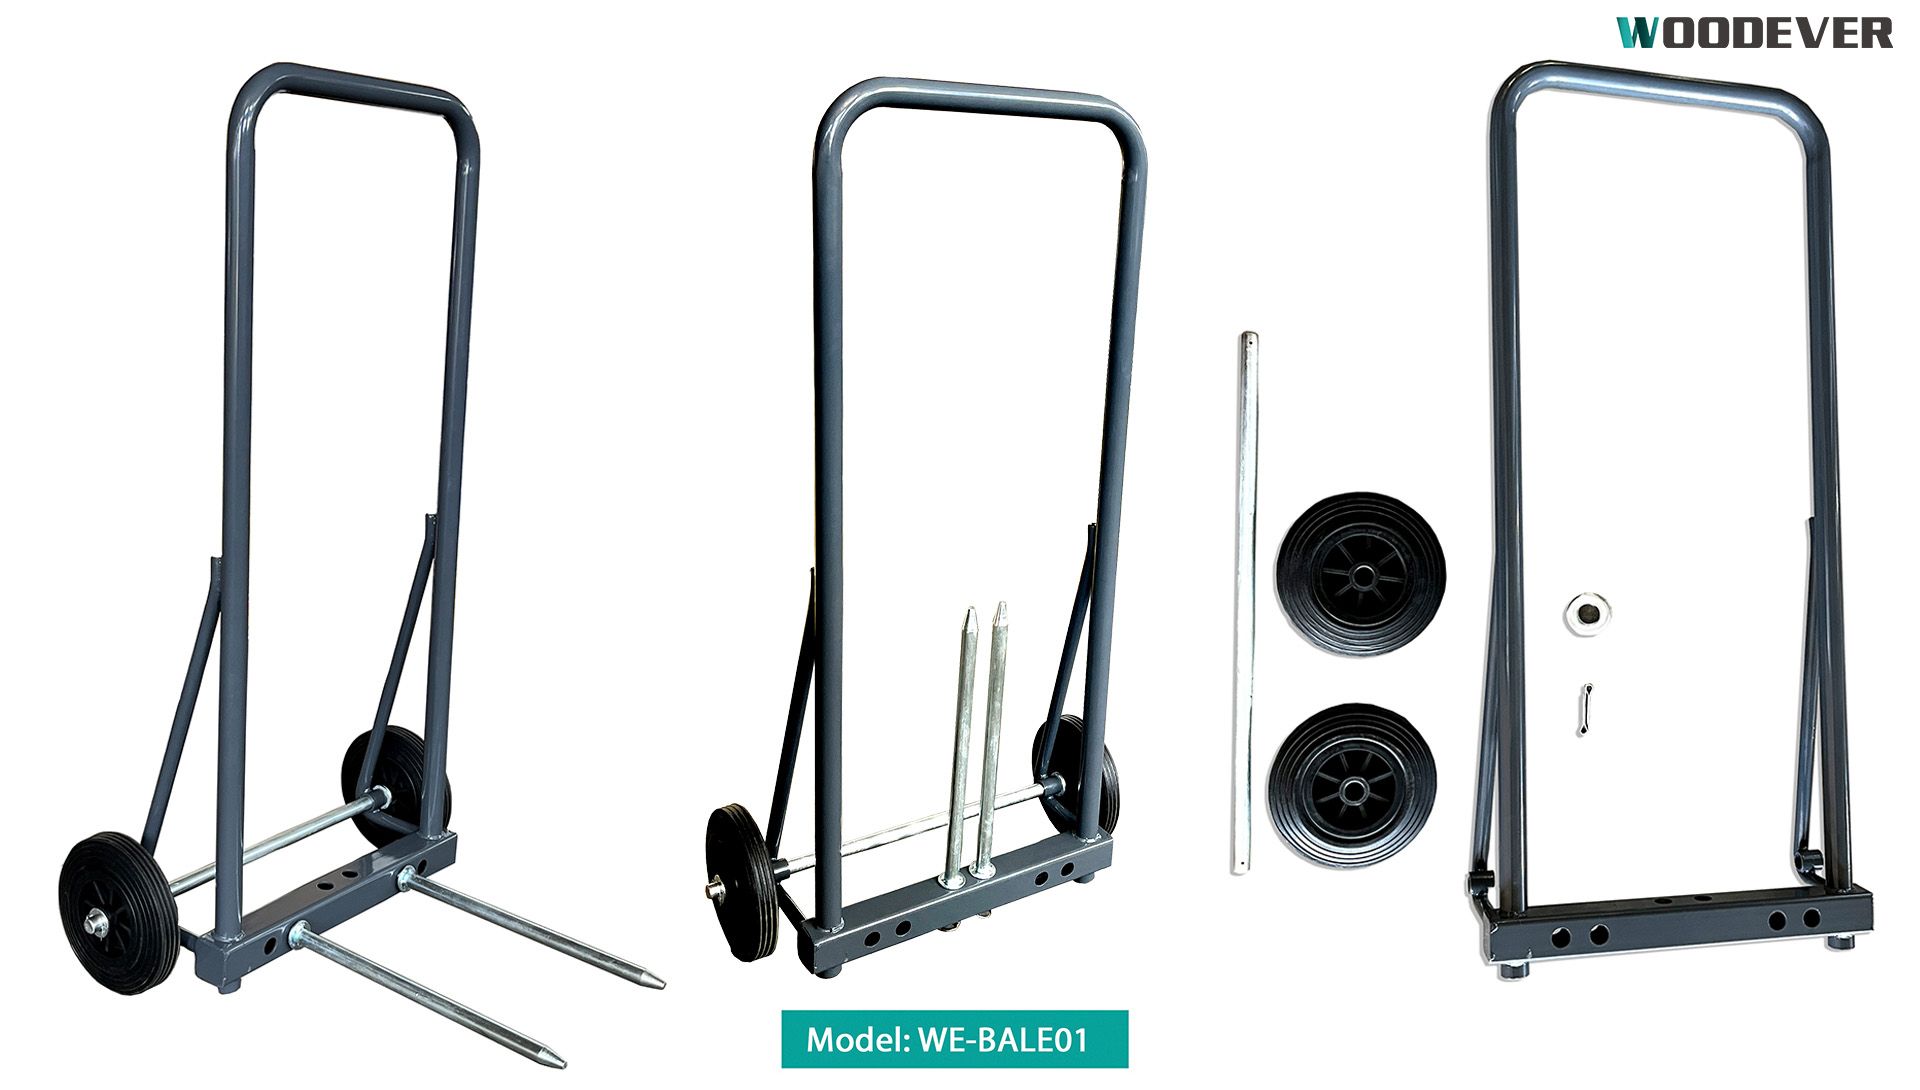 Engineer-to-order trolley for medium ballers and compactors dealing with plastics, cans, cardboard, and papers.